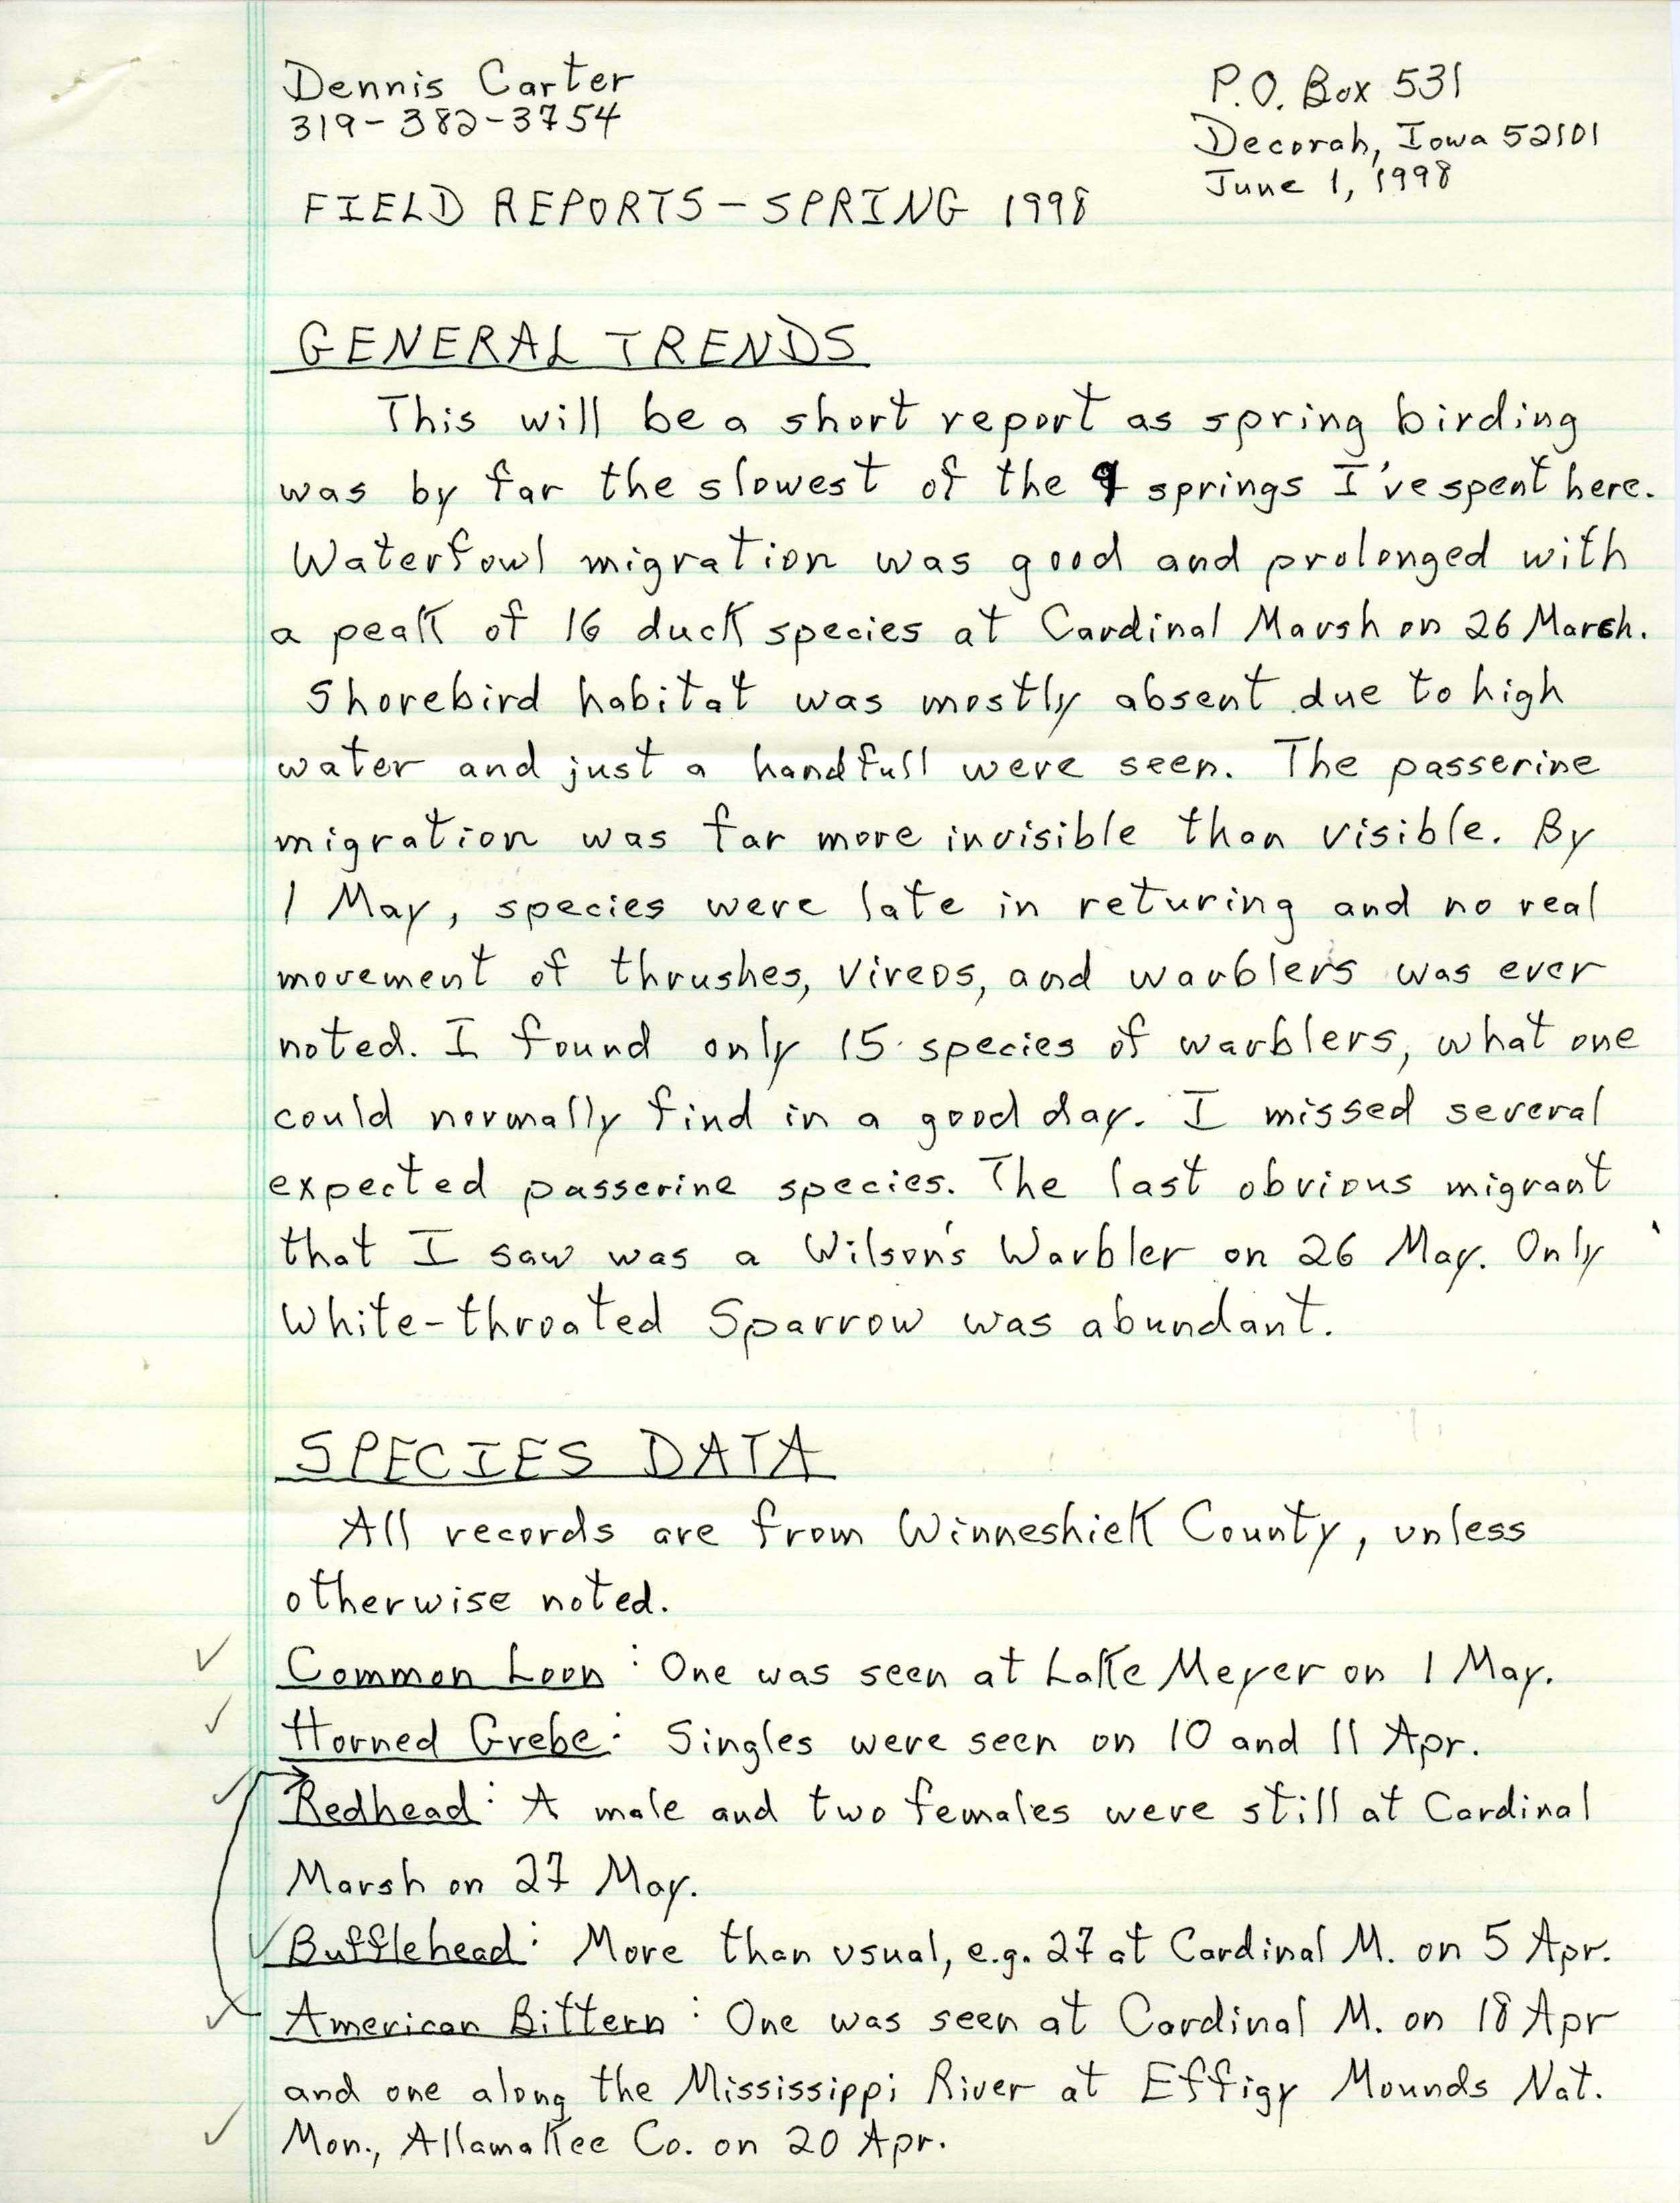 Field reports, spring 1998, Dennis Carter